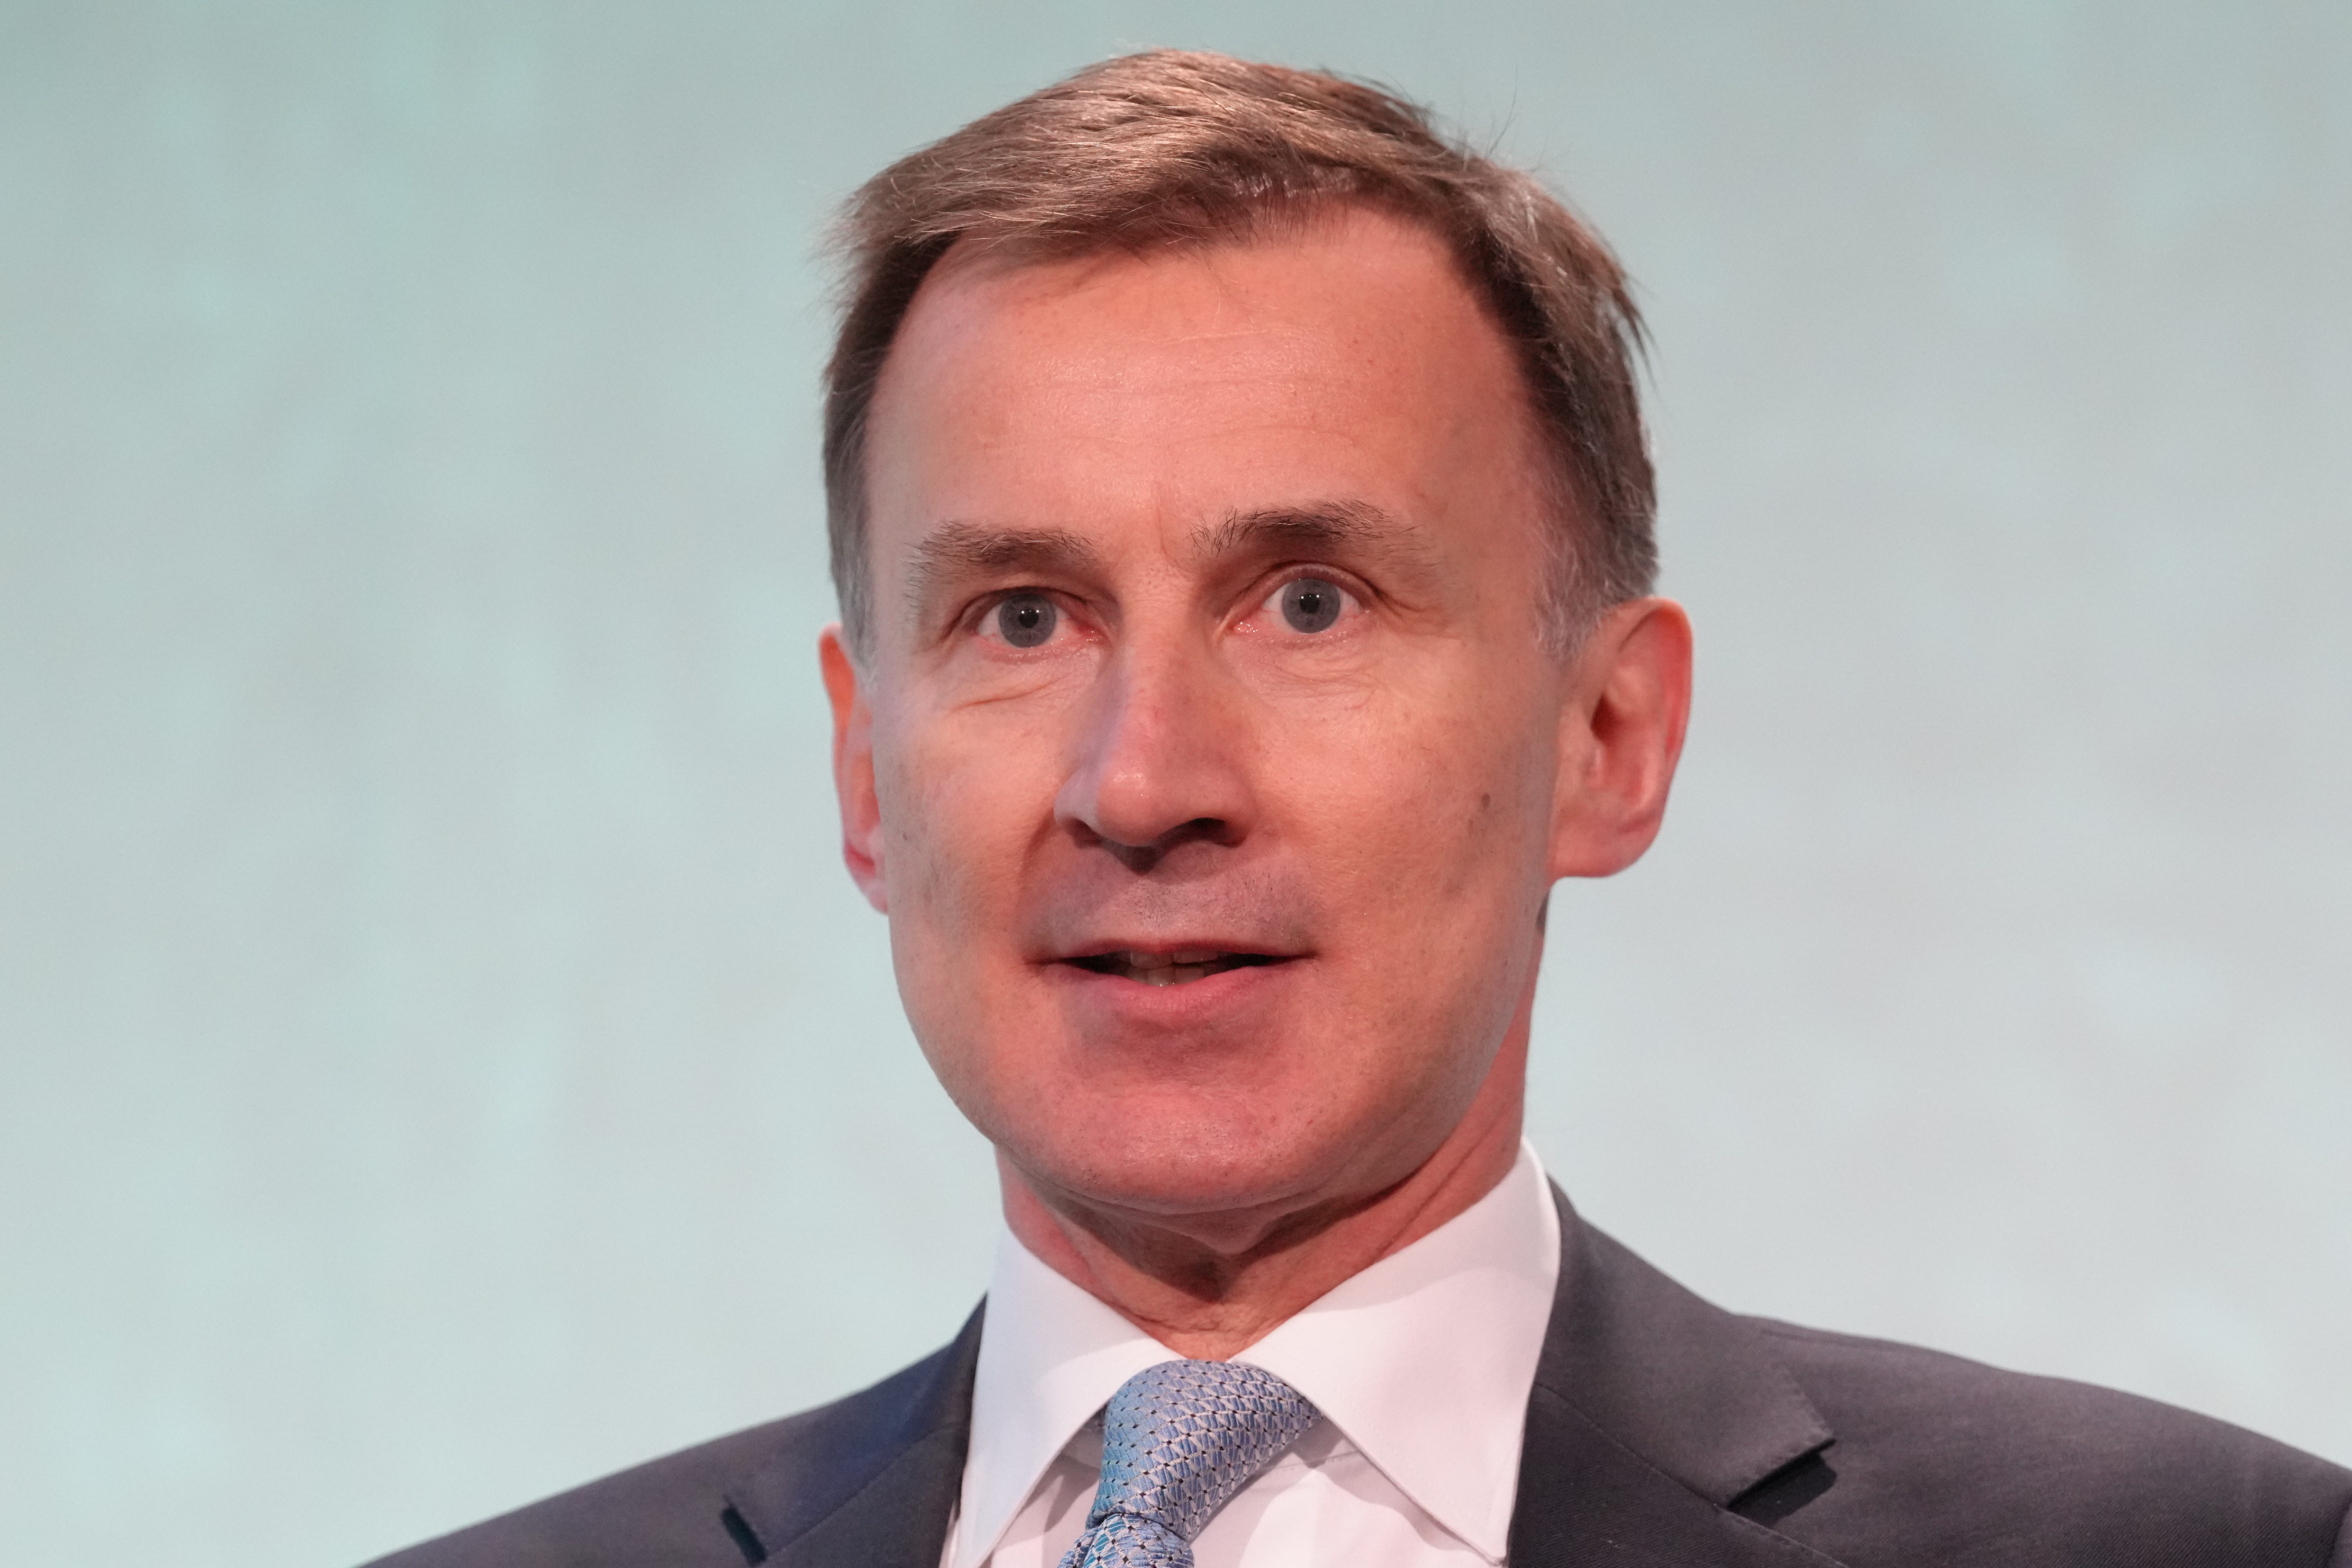 The UK should “absolutely” be concerned about the threat of IS, Jeremy Hunt said (Maja Smiejkowska/PA)